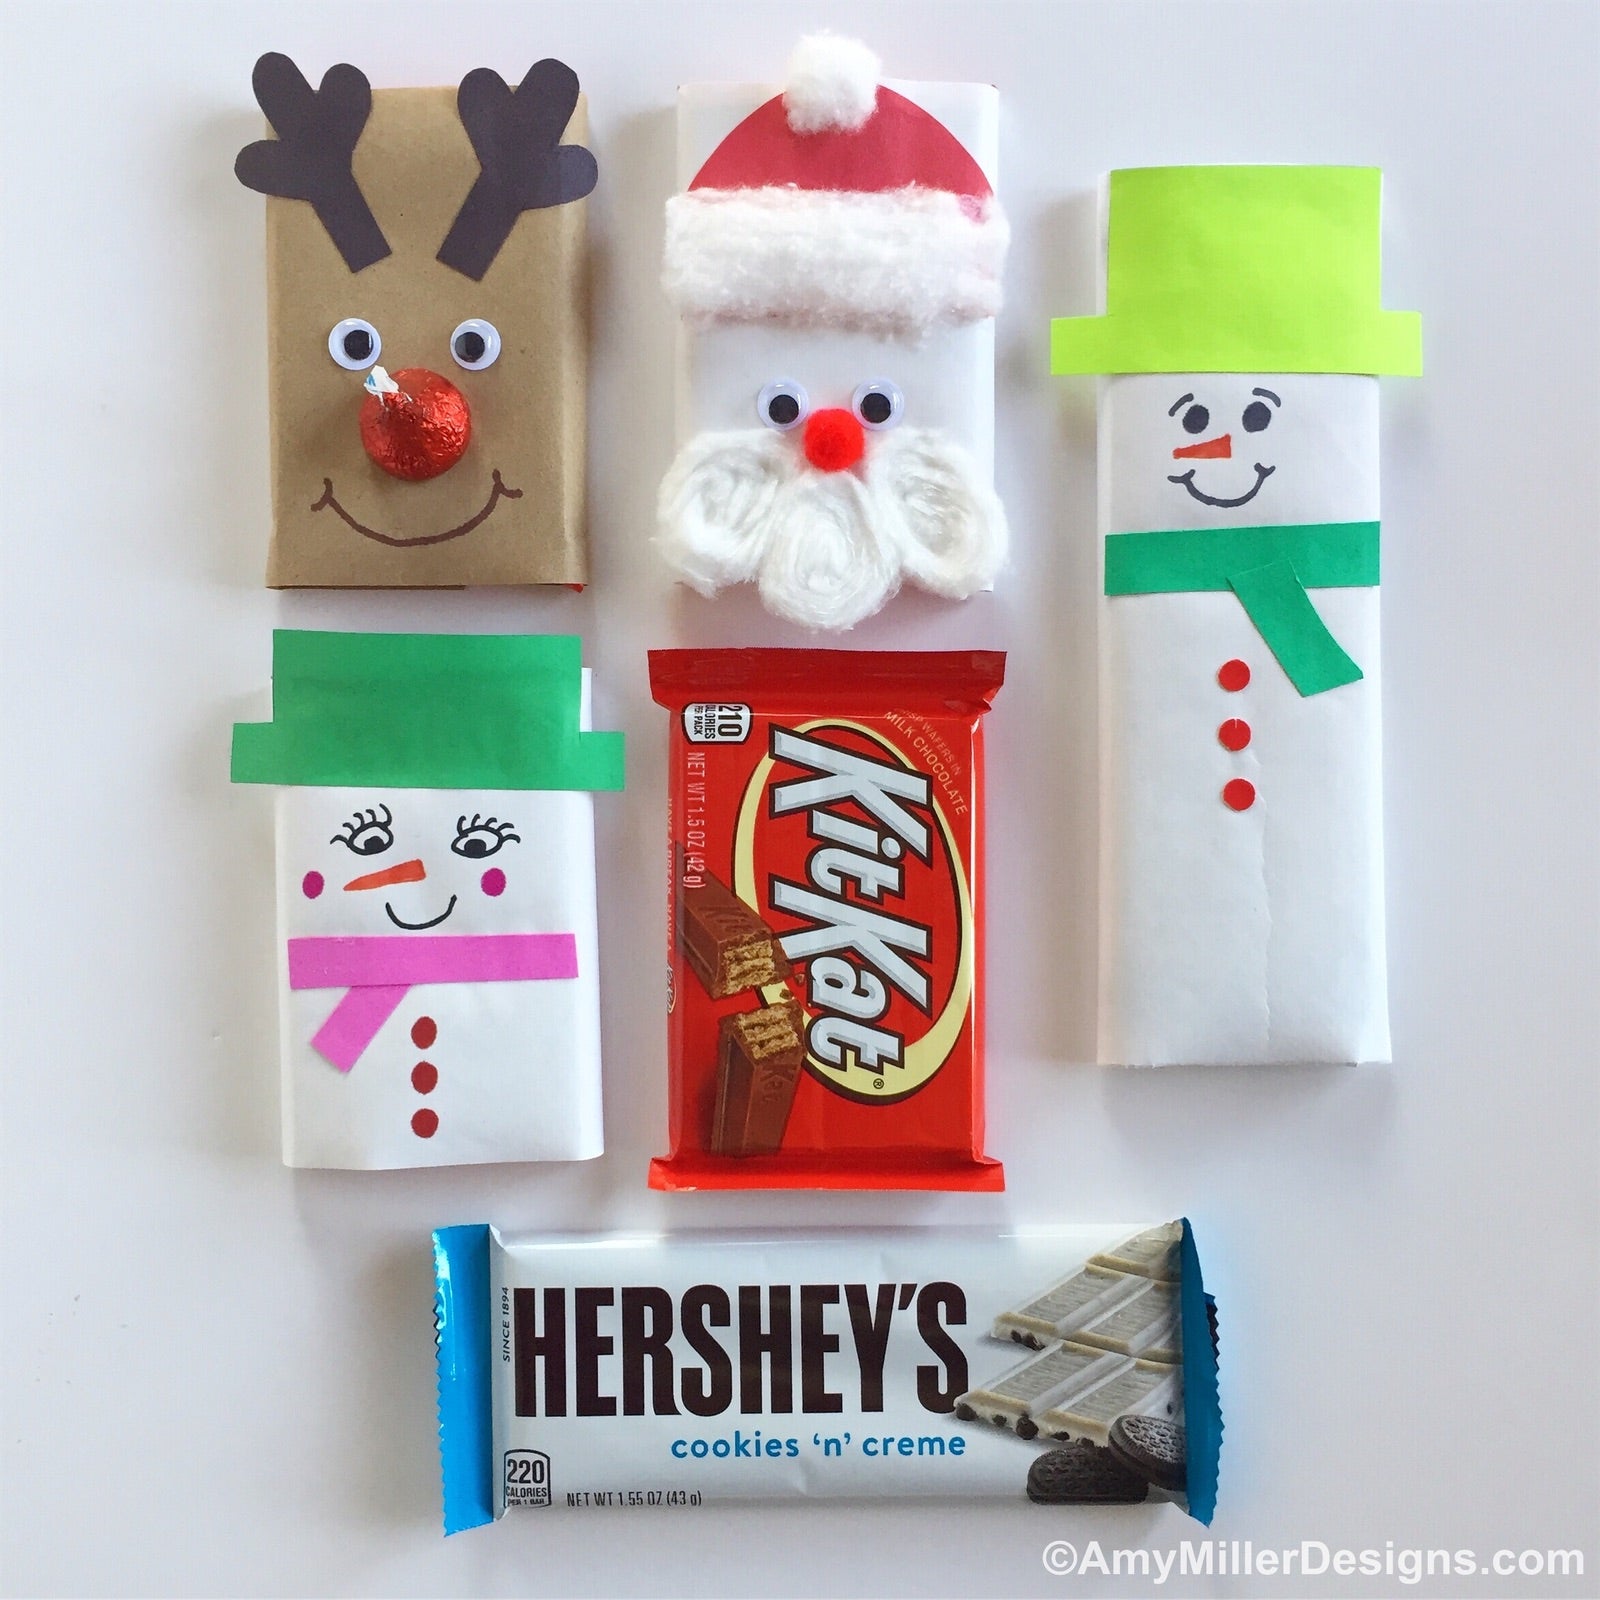 Christmas Candy Bar Wrappers